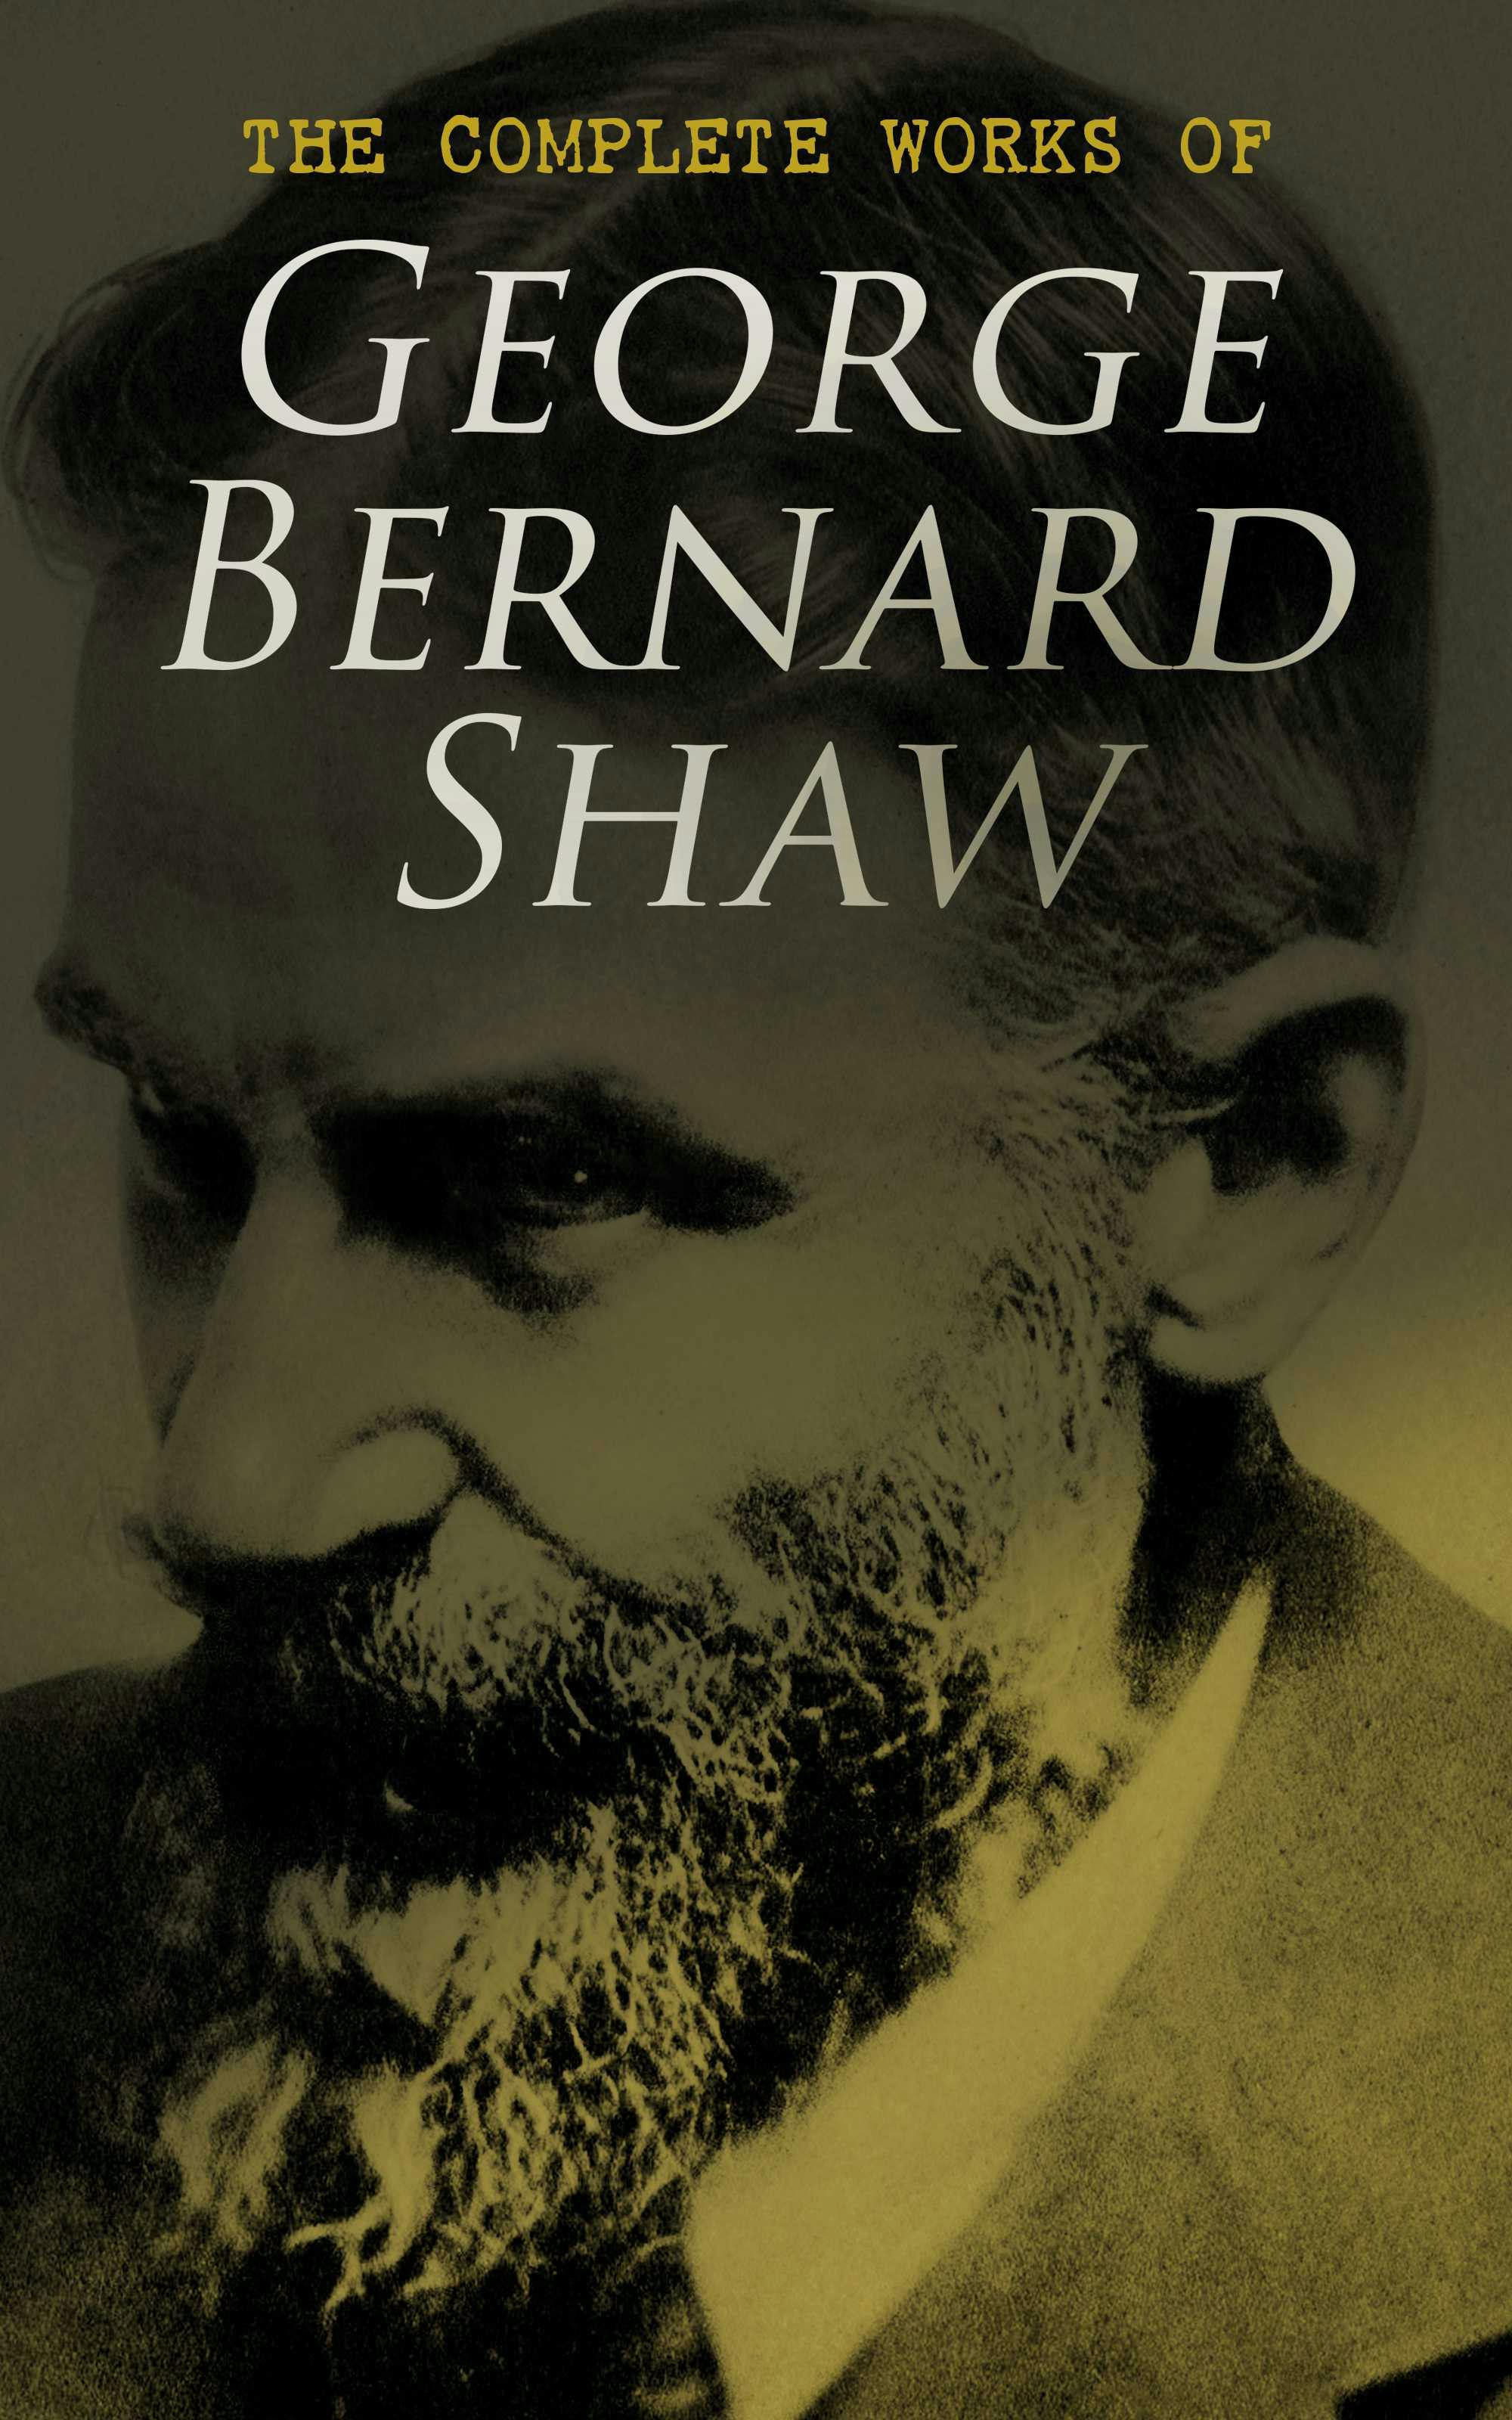 The Complete Works of George Bernard Shaw: Plays, Novels, Articles, Lectures, Letters and Essays - George Bernard Shaw